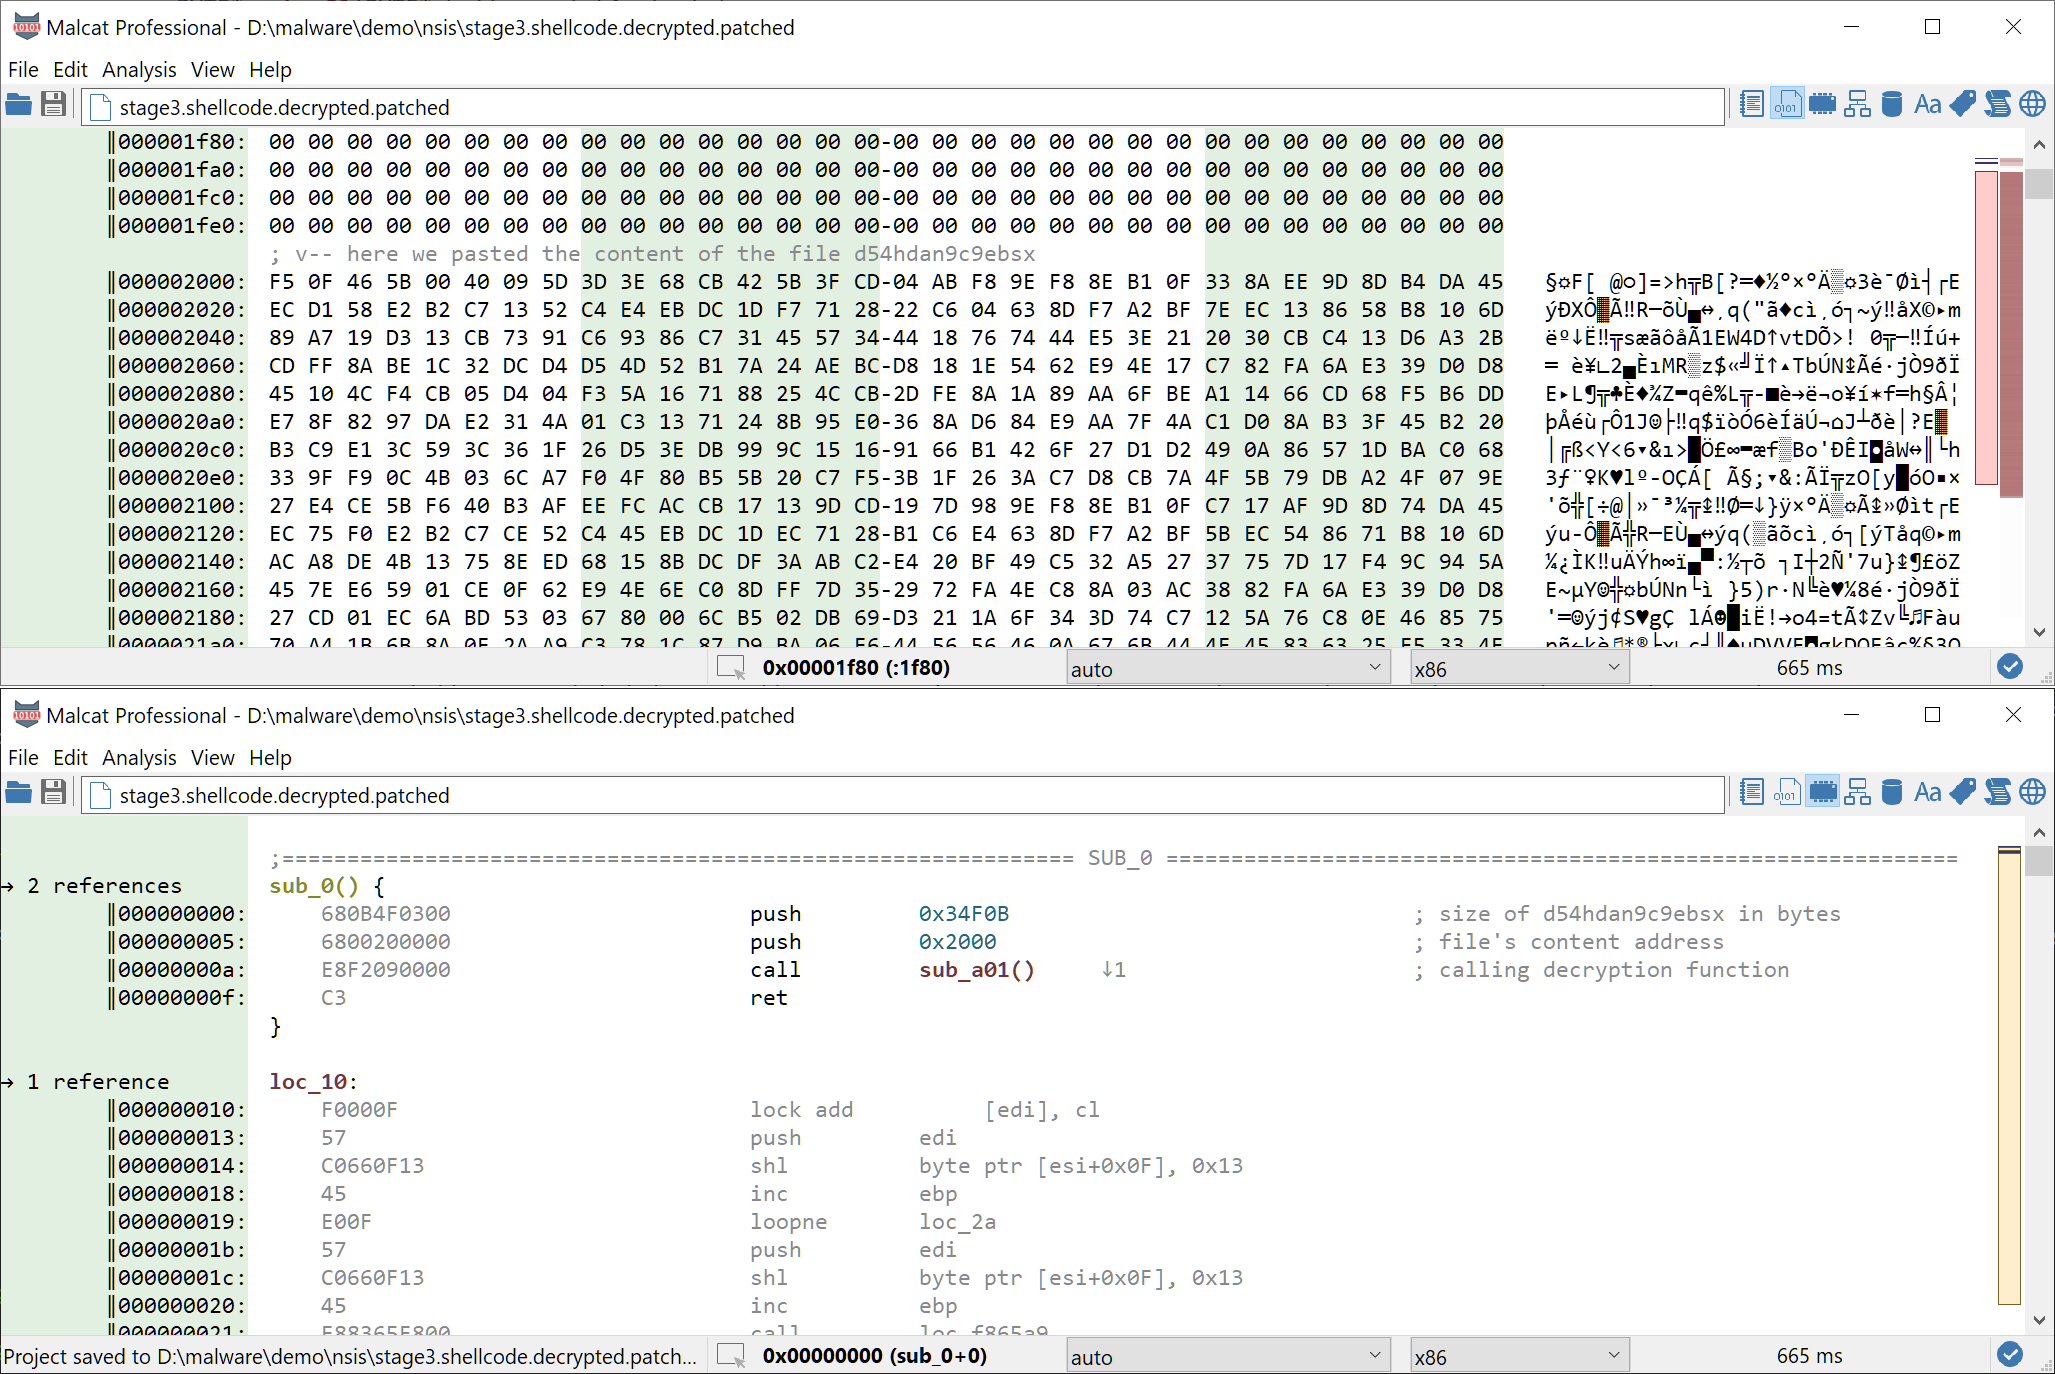 patching the shellcode